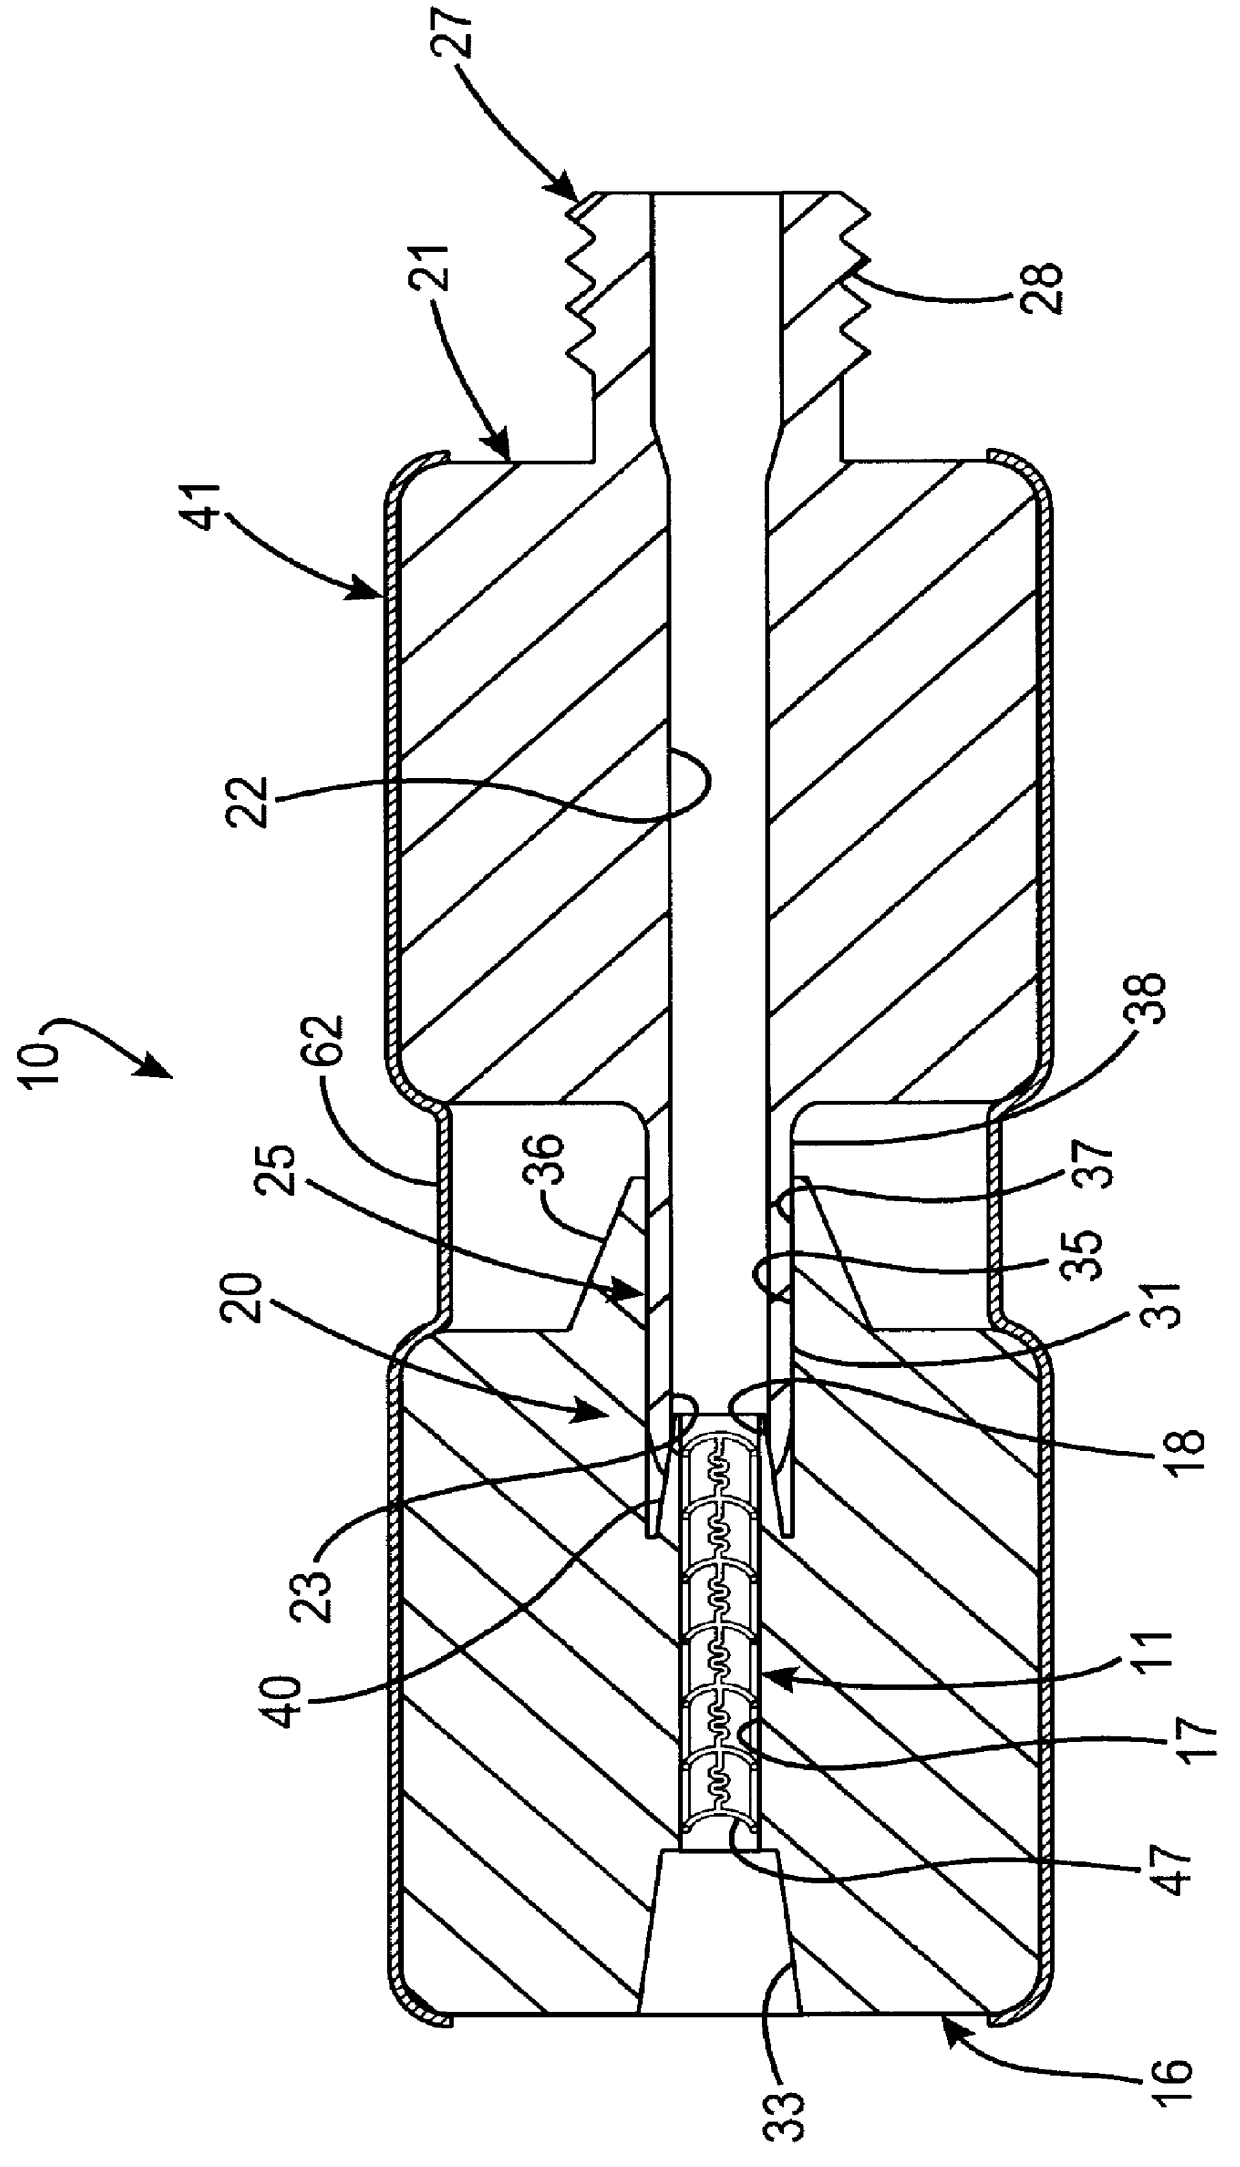 Stent loading assembly for a self-expanding stent